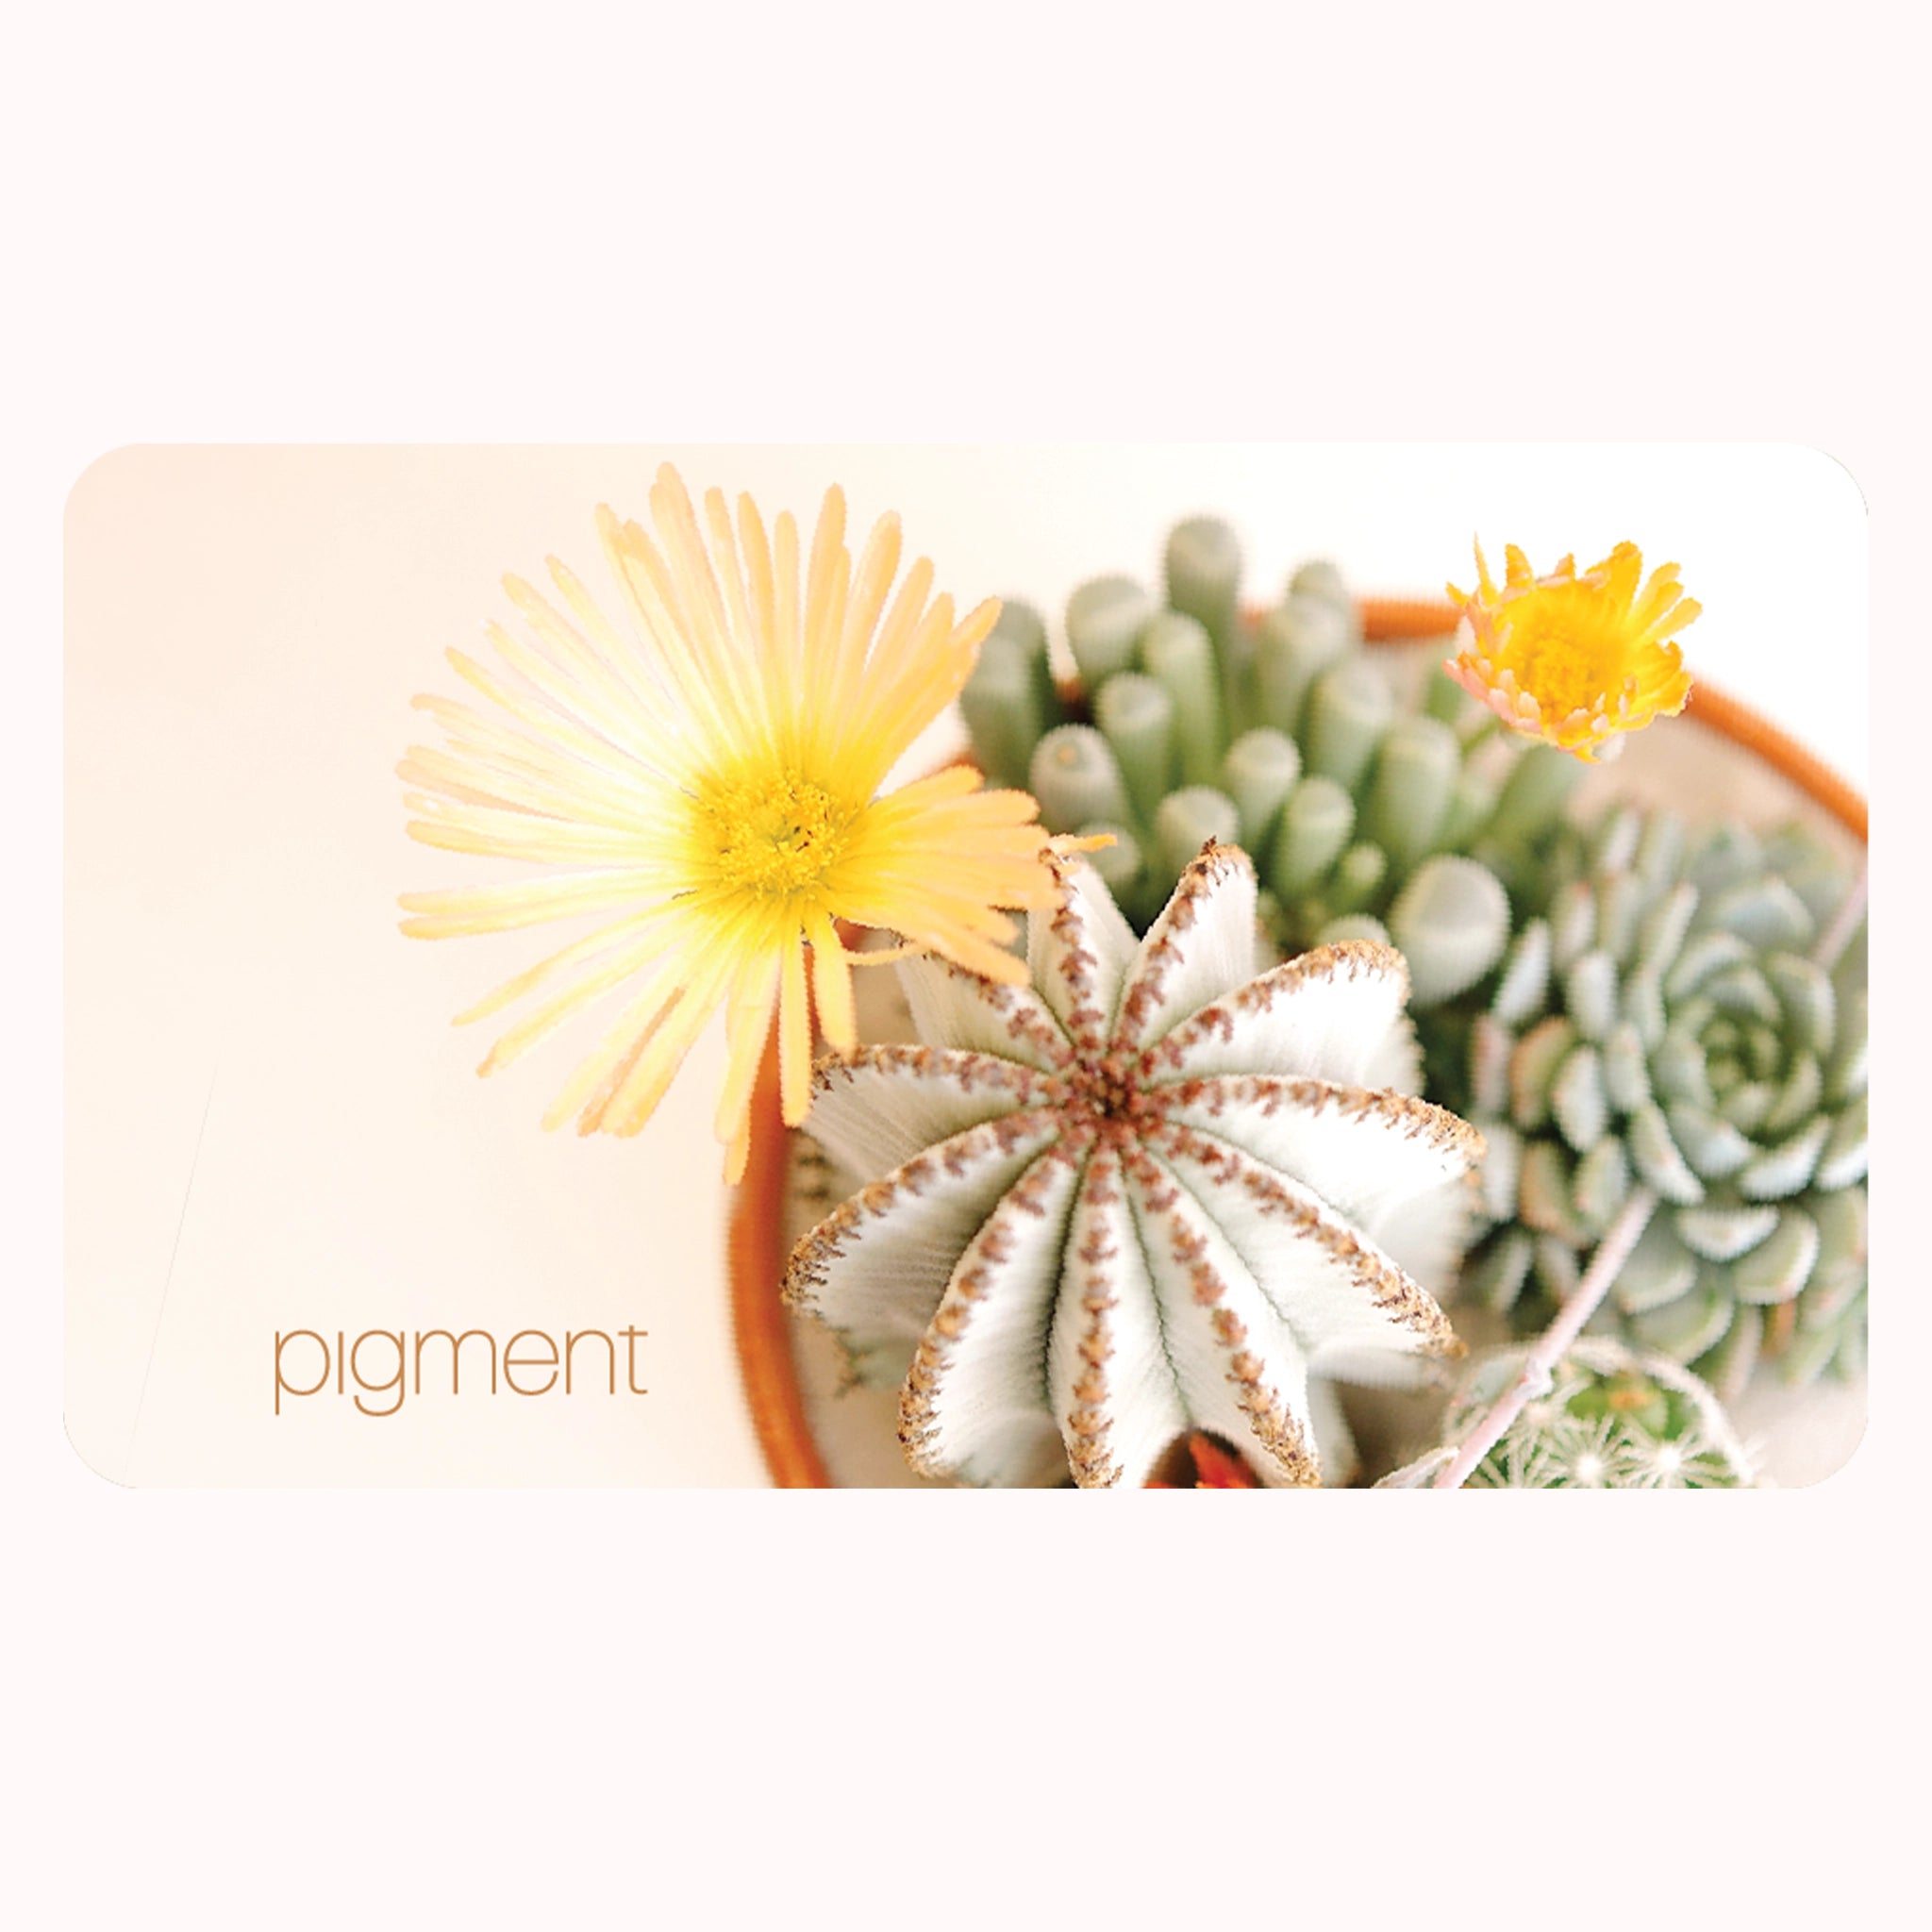 On a white background is a tan gift card with a photo of a succulent and cacti arrangement with a yellow blooming flower along with small text in the bottom left corner that reads, "Pigment". 